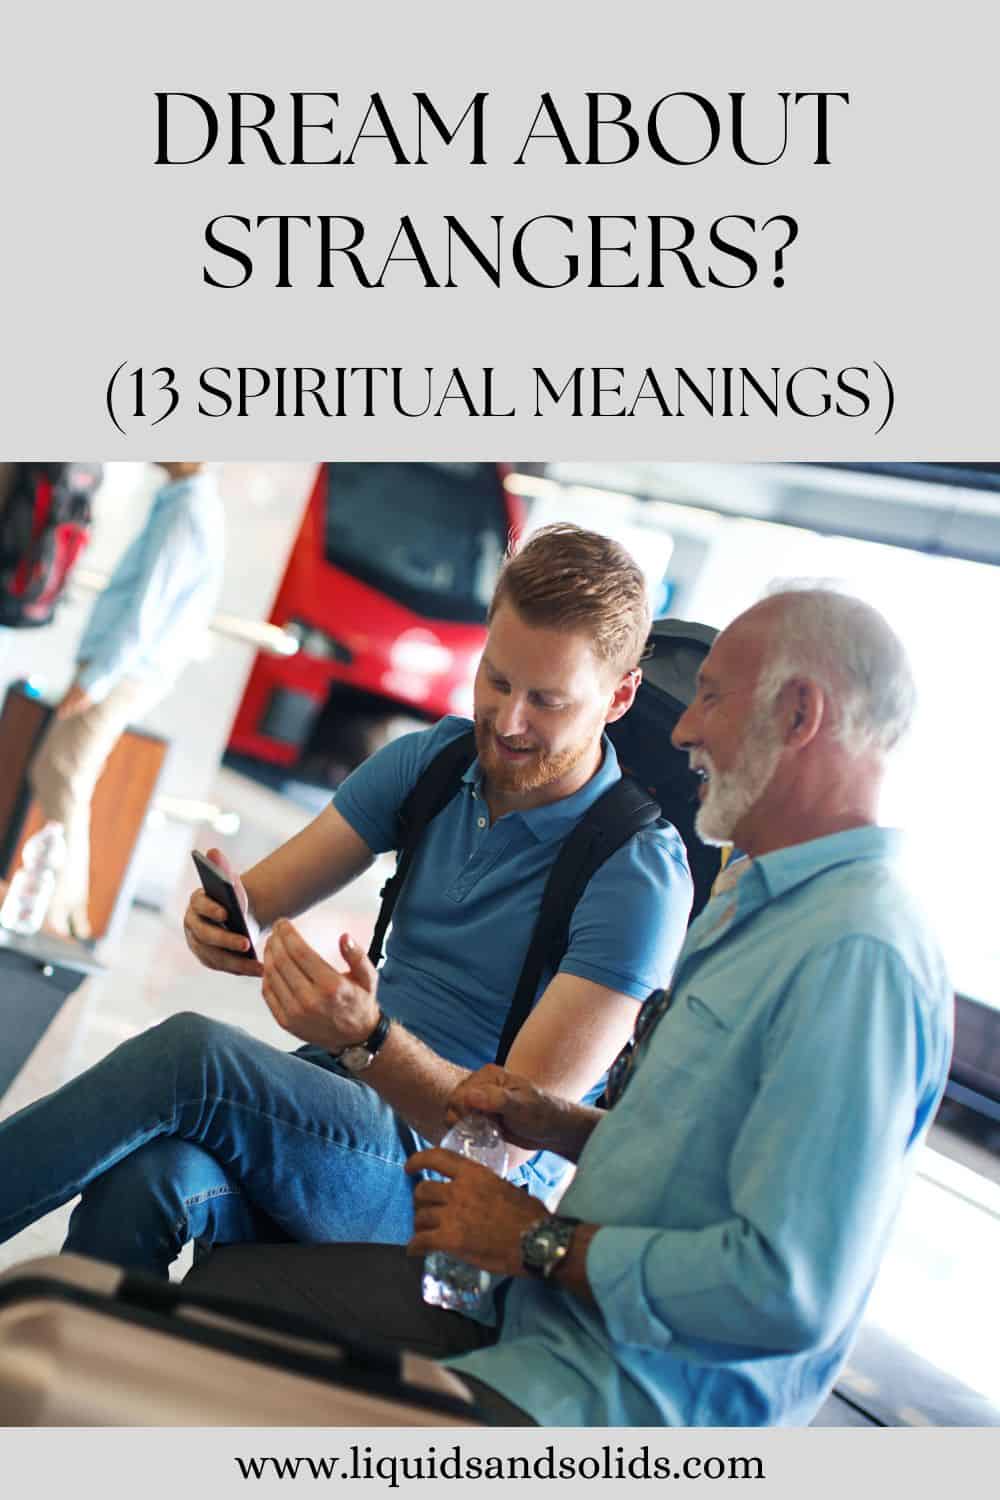 Dream About Strangers? (13 Spiritual Meanings)